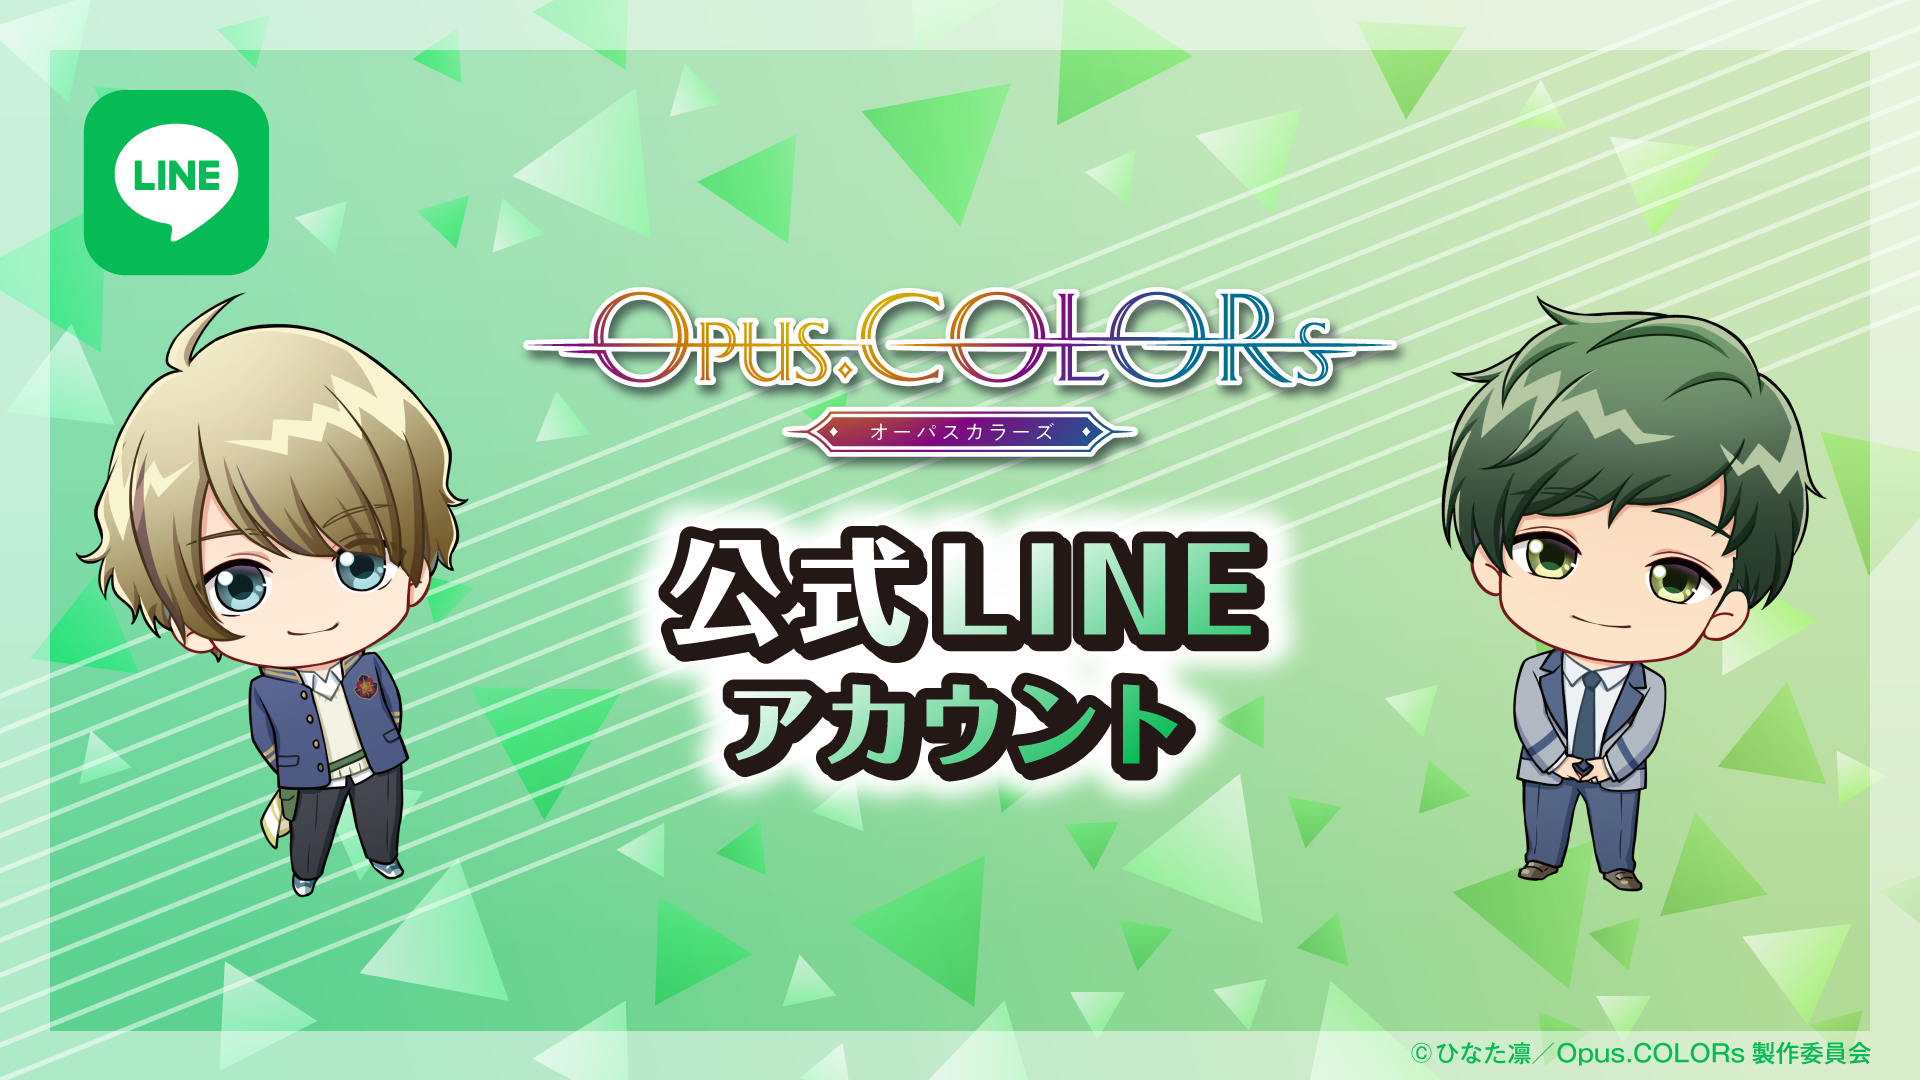 opus-colors LINE official Account